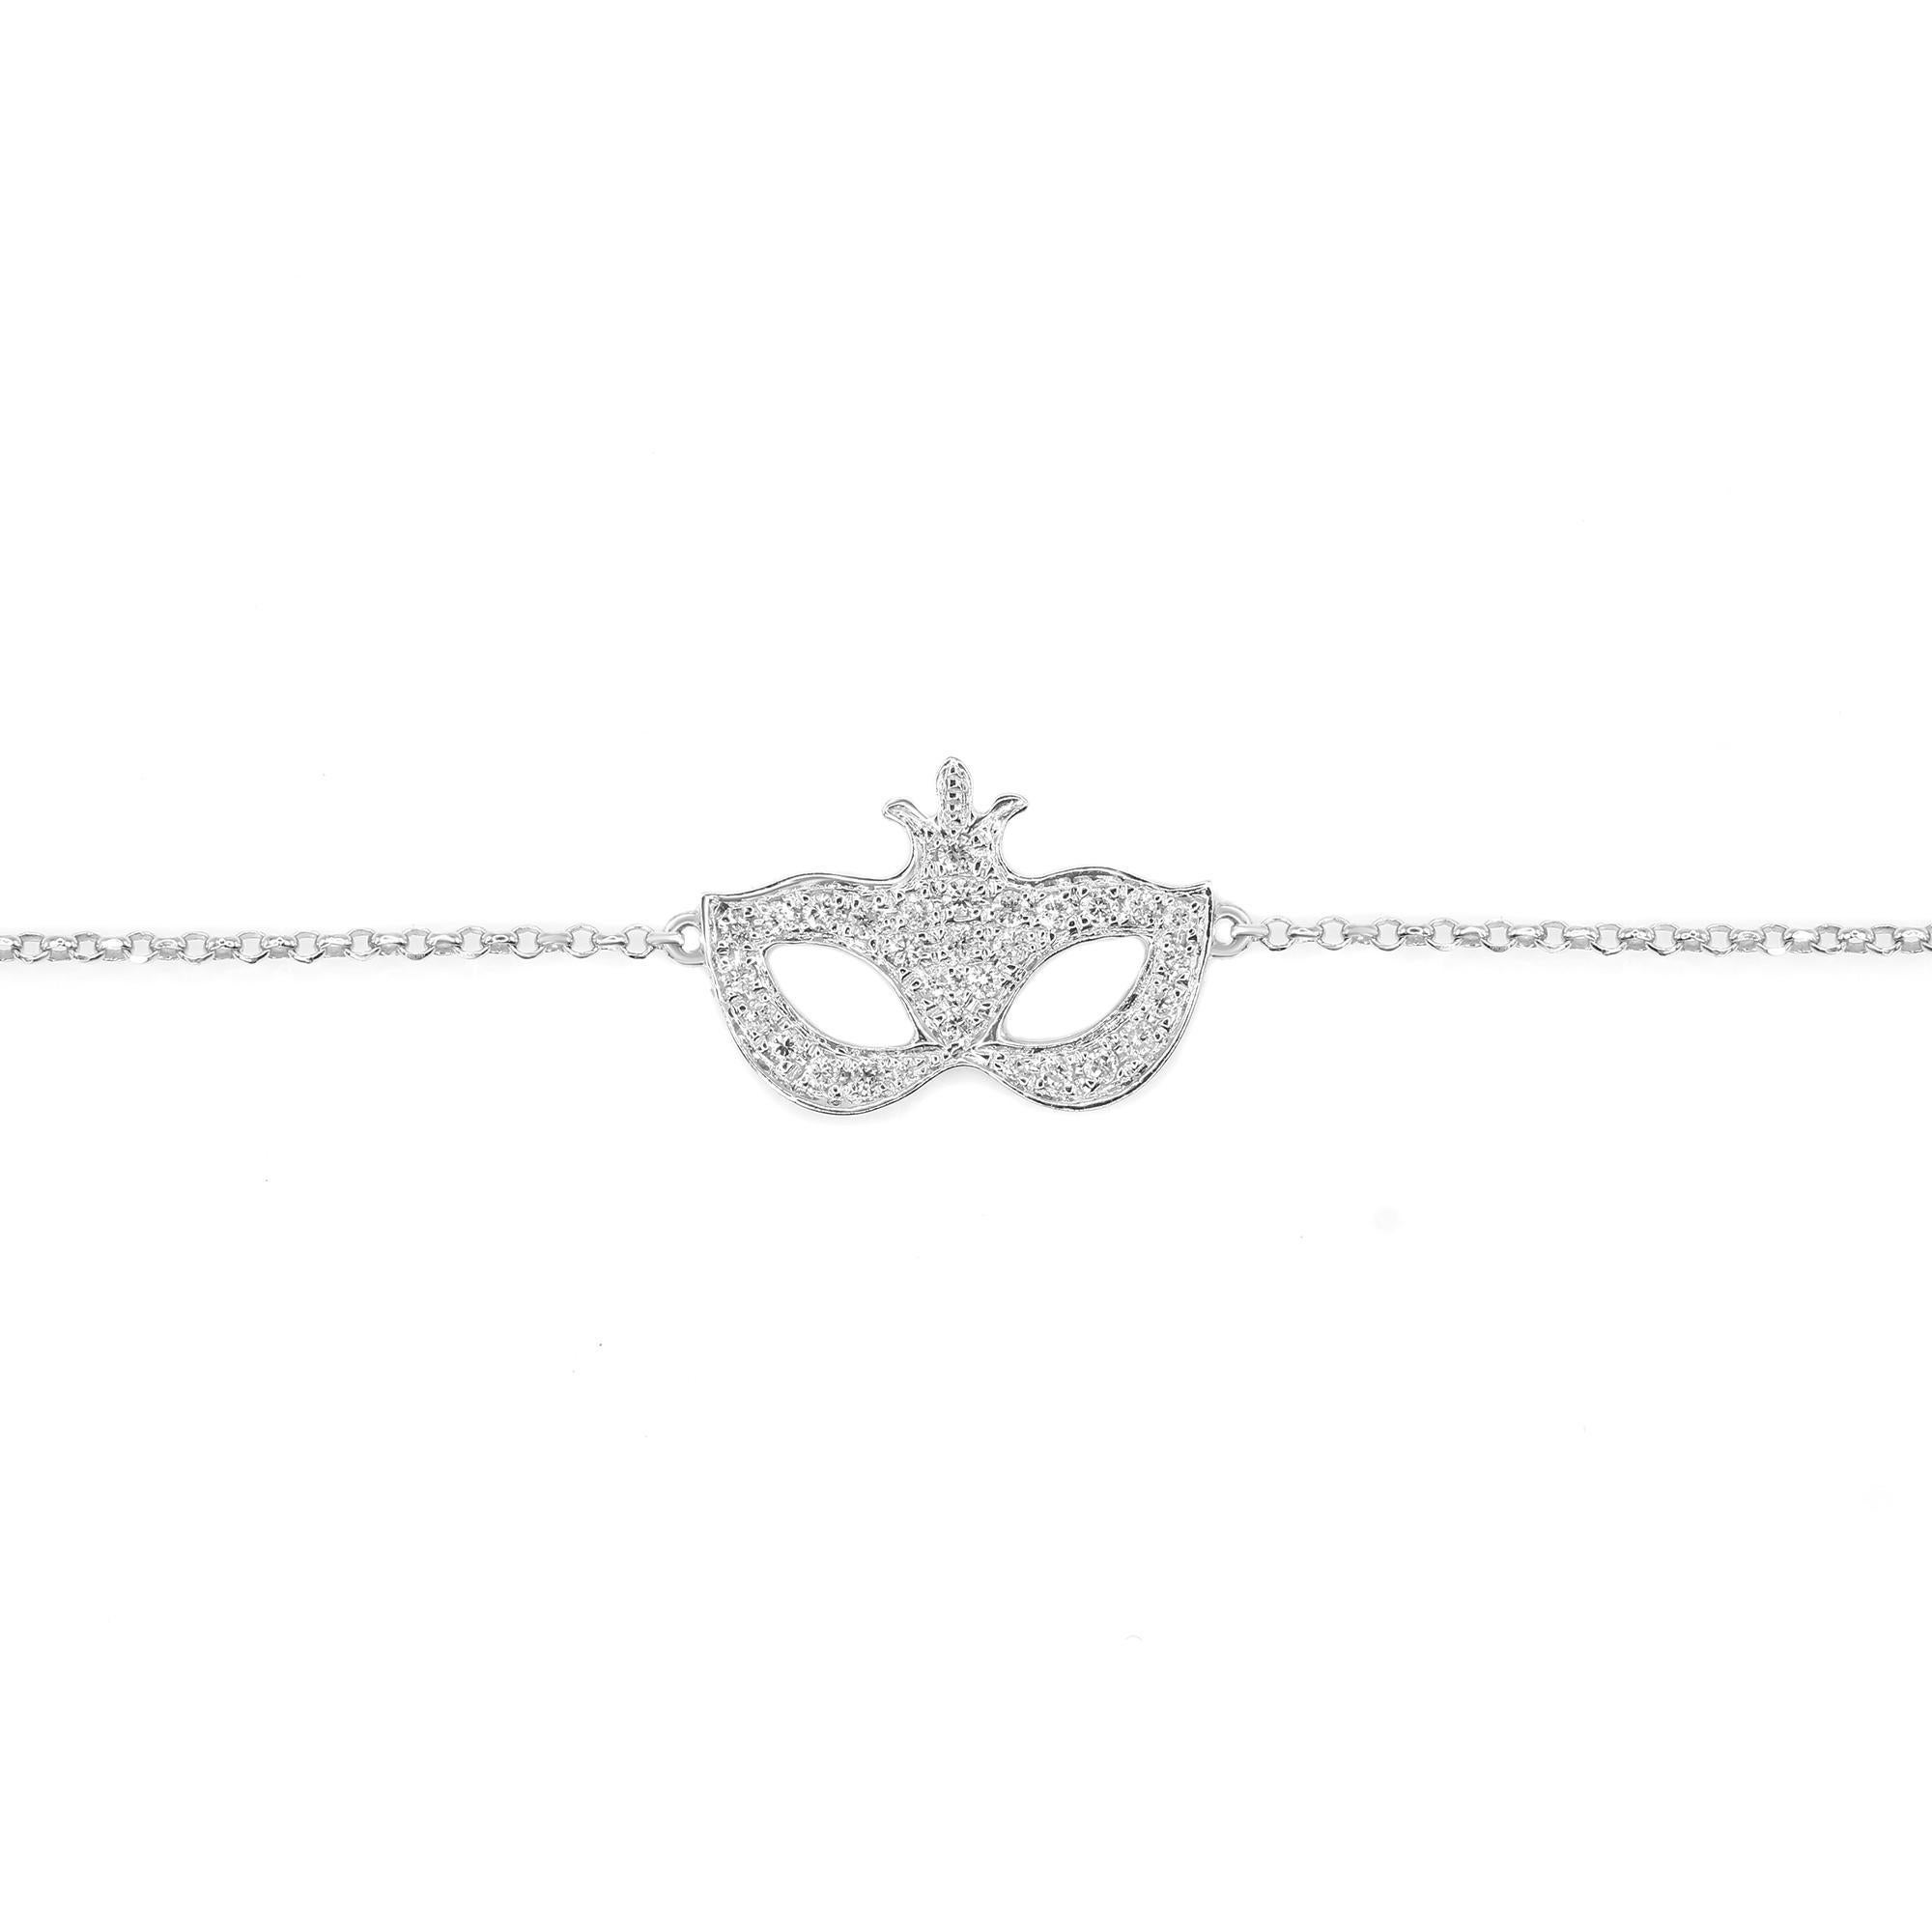 A small masquerade mask simple diamond chain bracelet. Crafted in 18k white gold. Set with 0.23cttw of tiny round cut diamonds. Diamond color I and SI-I clarity. Bracelet length: 7 inches. Comes with a presentable gift box and appraisal.